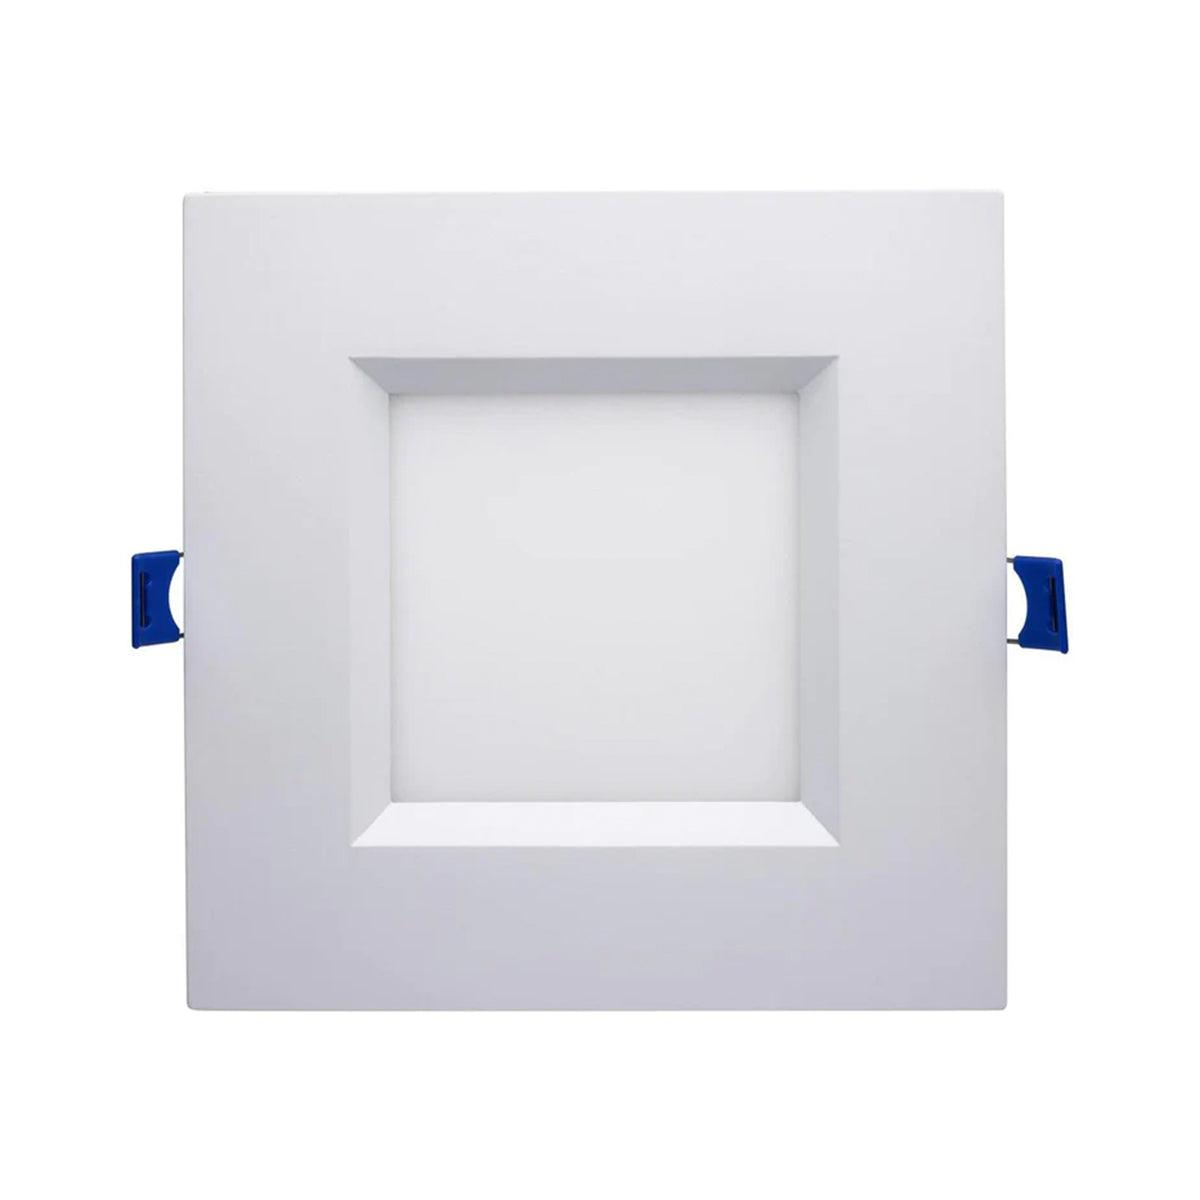 SlimFit Canless LED Recessed Light, 5 Inch, Square, 15 Watt, 1000 Lumens, Selectable CCT, 2700K to 5000K, Ultra Thin